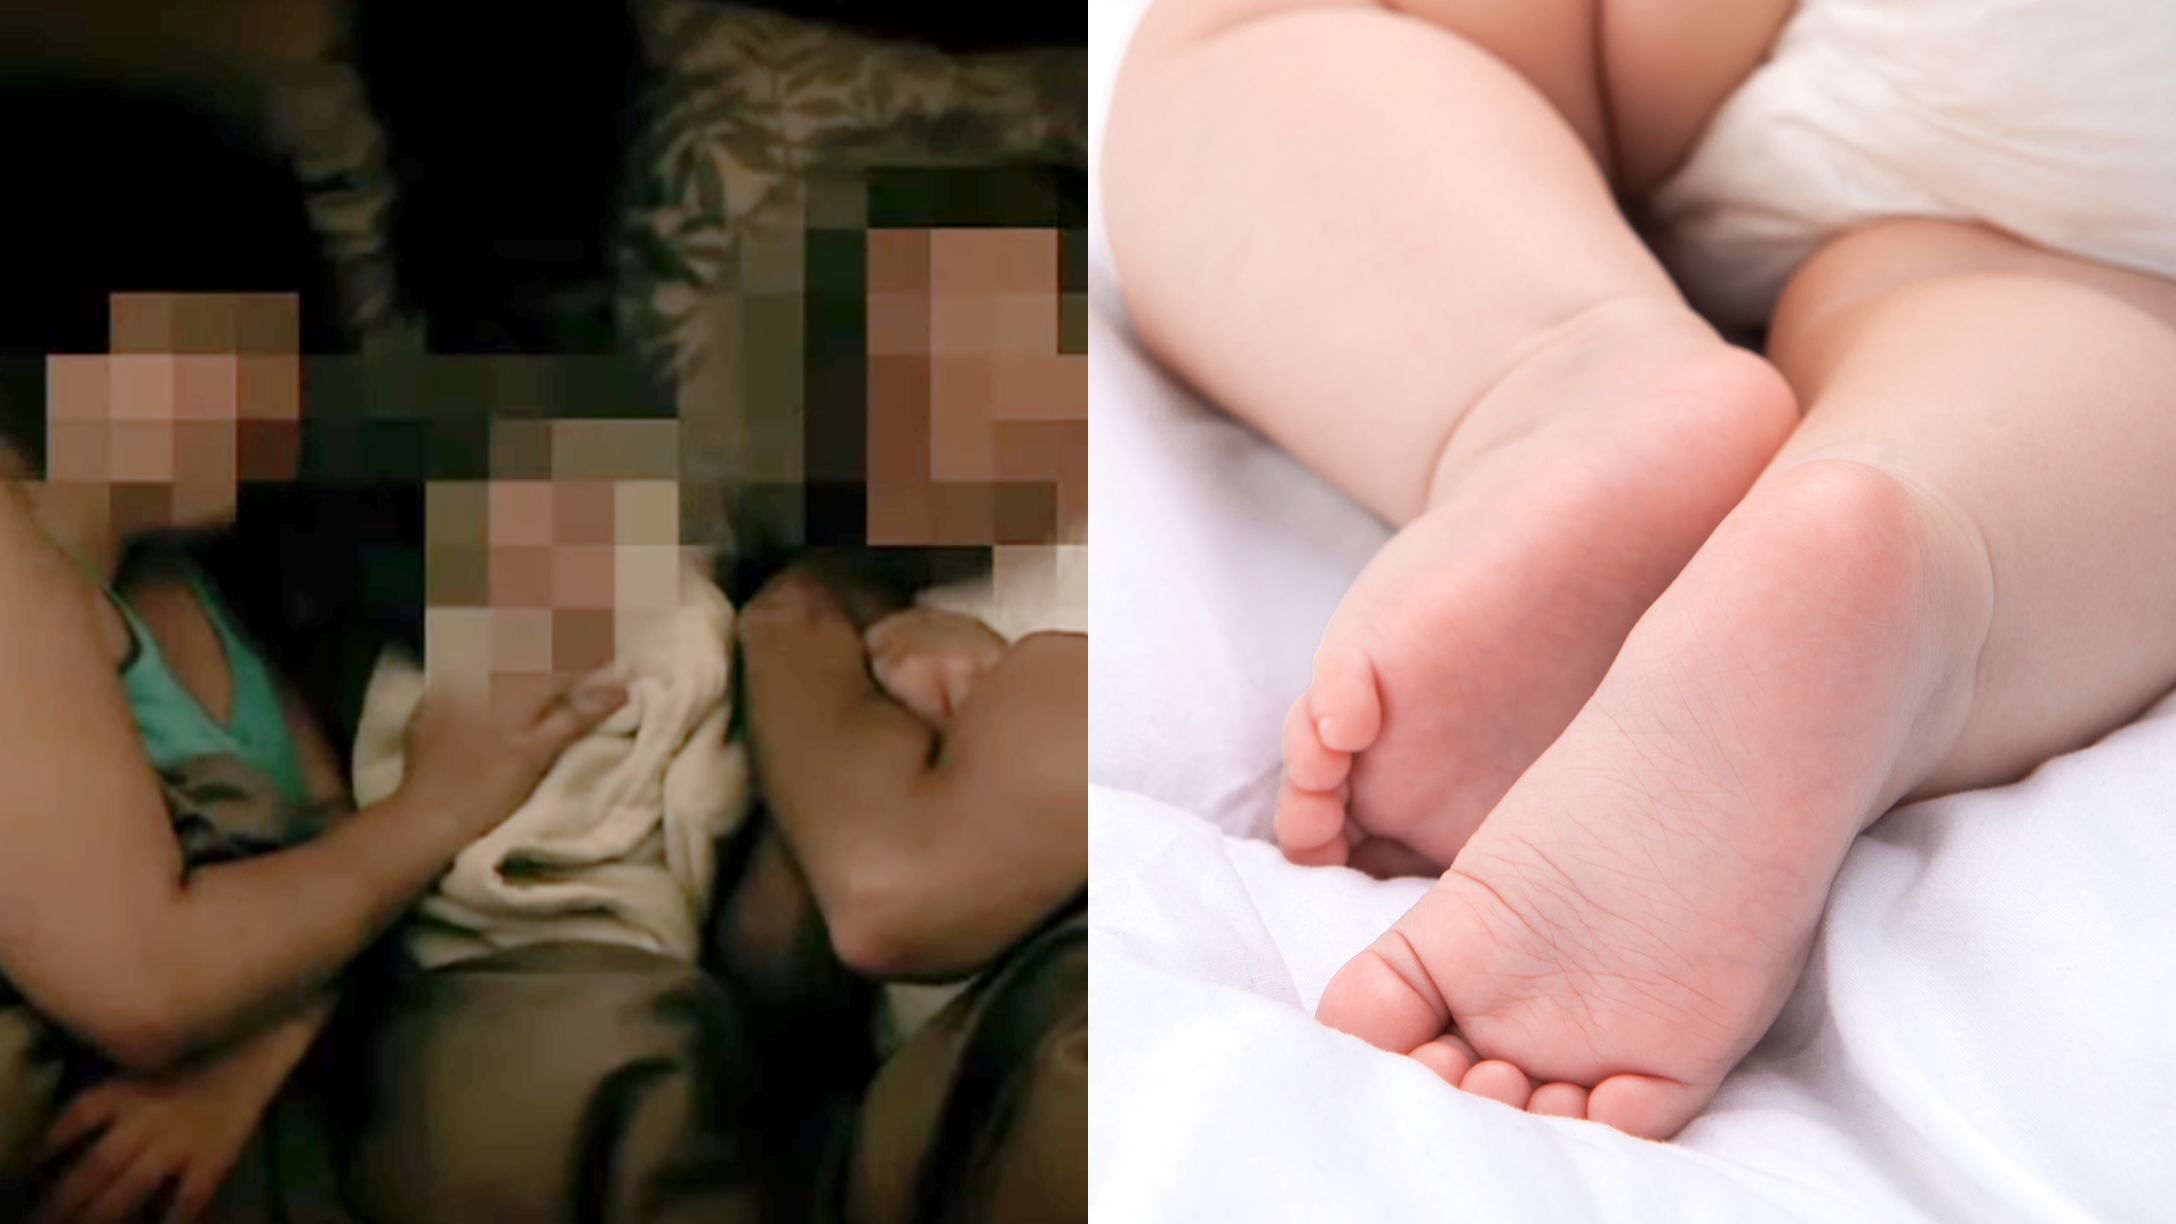 Co-Sleeping Mom Admits to Having Sex With Baby in Bed (VIDEO) CafeMom pic